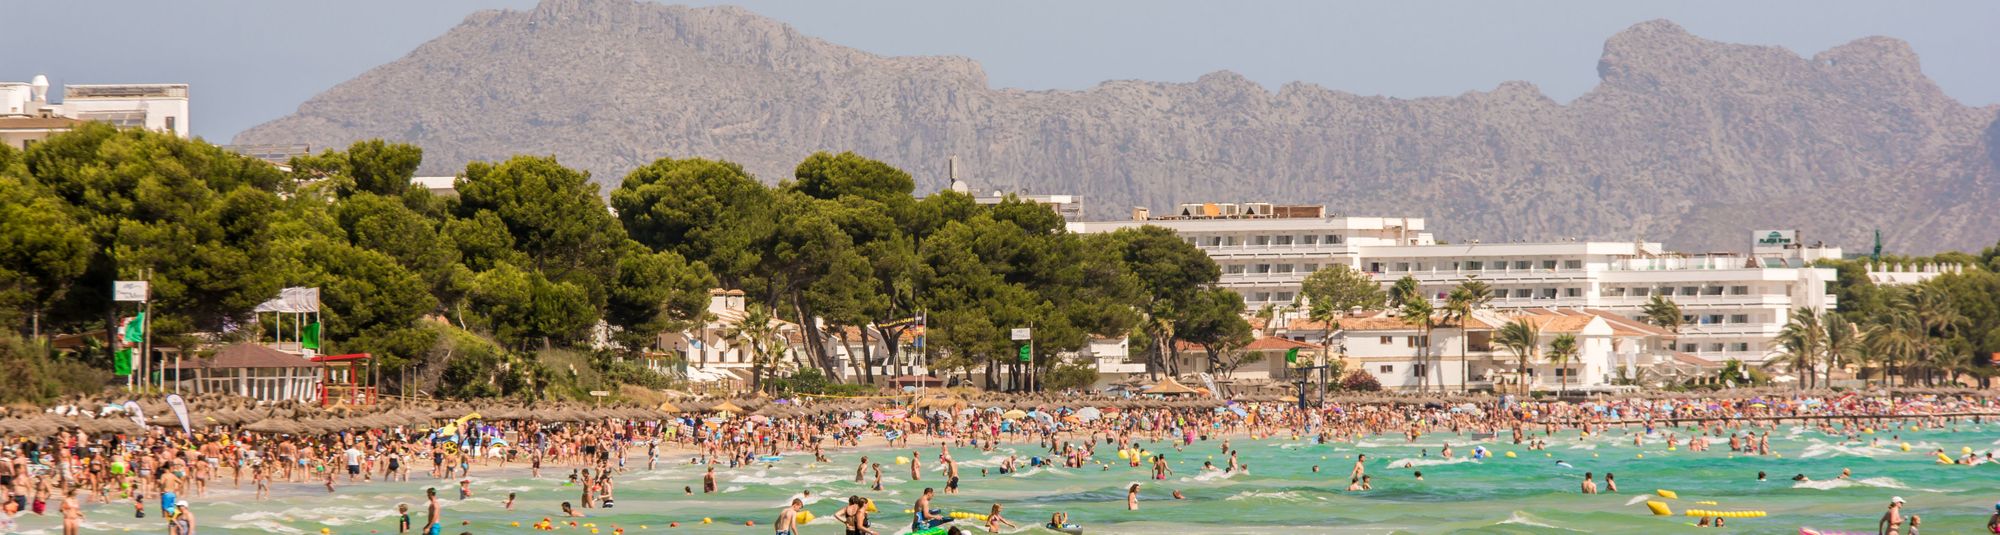 An overwhelmingly full beach in the bay of Alcudia, Mallorca - with the backdrop of a mountain range. Photo: Getty